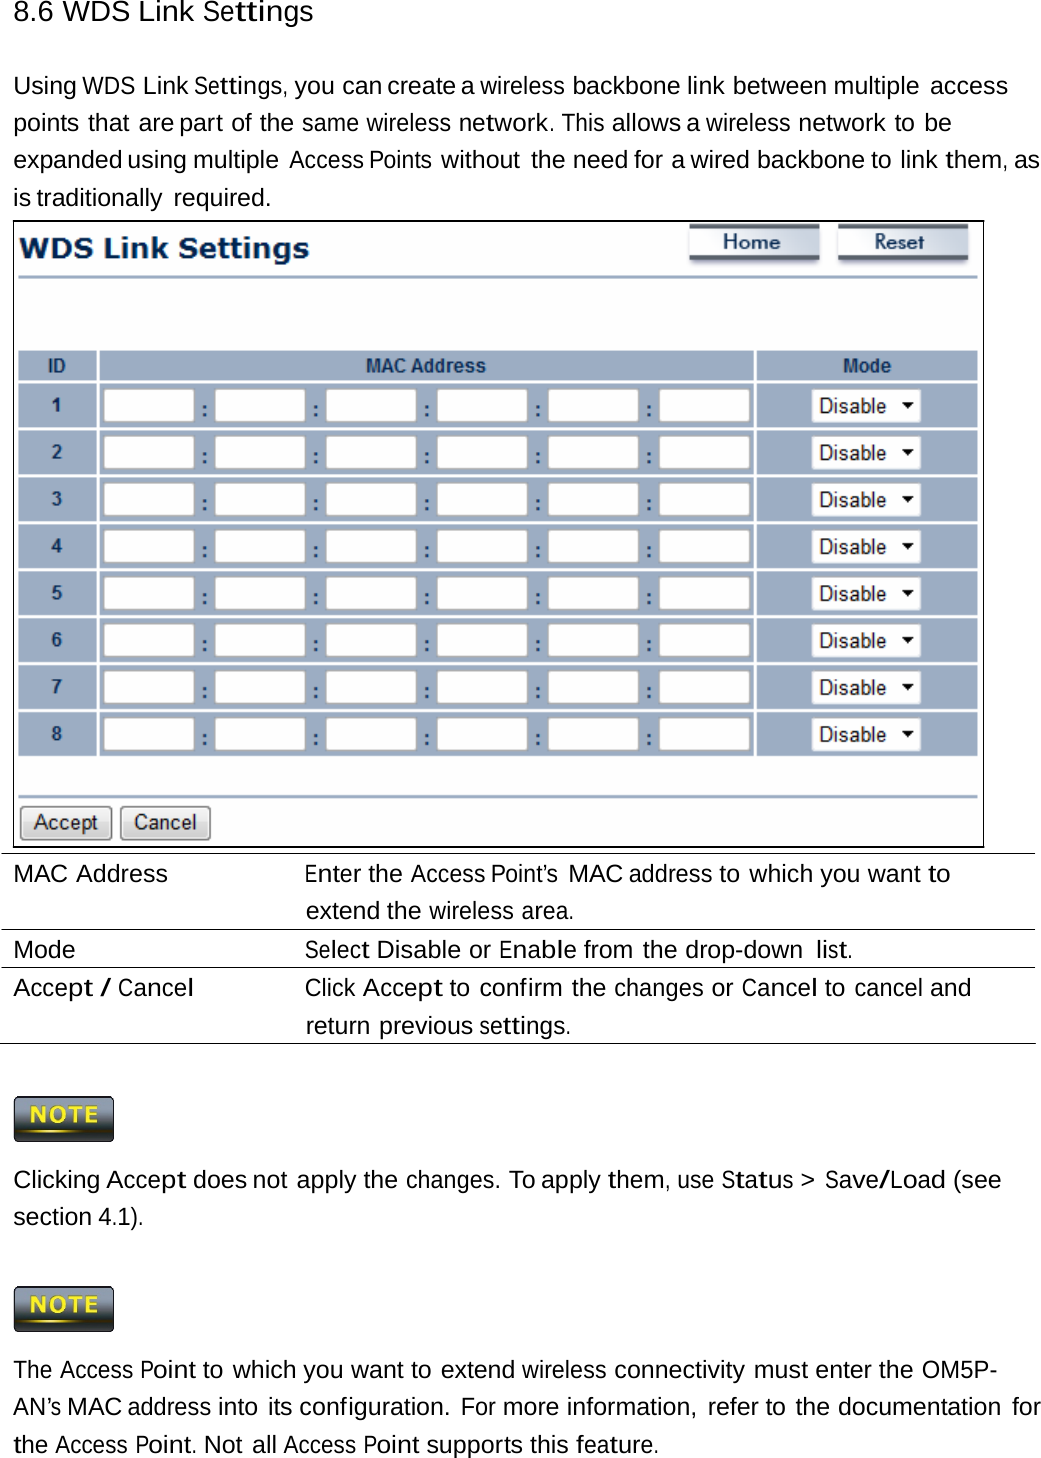 8.6 WDS Link Settings Using WDS Link Settings, you can create a wireless backbone link between multiple  access points that are part of the same wireless network. This allows a wireless network to be expanded using multiple Access Points without the need for a wired backbone to link them, as is traditionally  required. MAC Address  Enter the Access Point’s MAC address to which you want to extend the wireless area. Mode  Select Disable or Enable from the drop-down list. Accept / Cancel Click Accept to confirm the changes or Cancel to cancel and return previous settings.  Clicking Accept does not apply the changes. To apply them, use Status &gt; Save/Load (see section 4.1).  The Access Point to which you want to extend wireless connectivity must enter the OM5P-AN’s MAC address into its configuration. For more information, refer to the documentation for the Access Point. Not all Access Point supports this feature. 